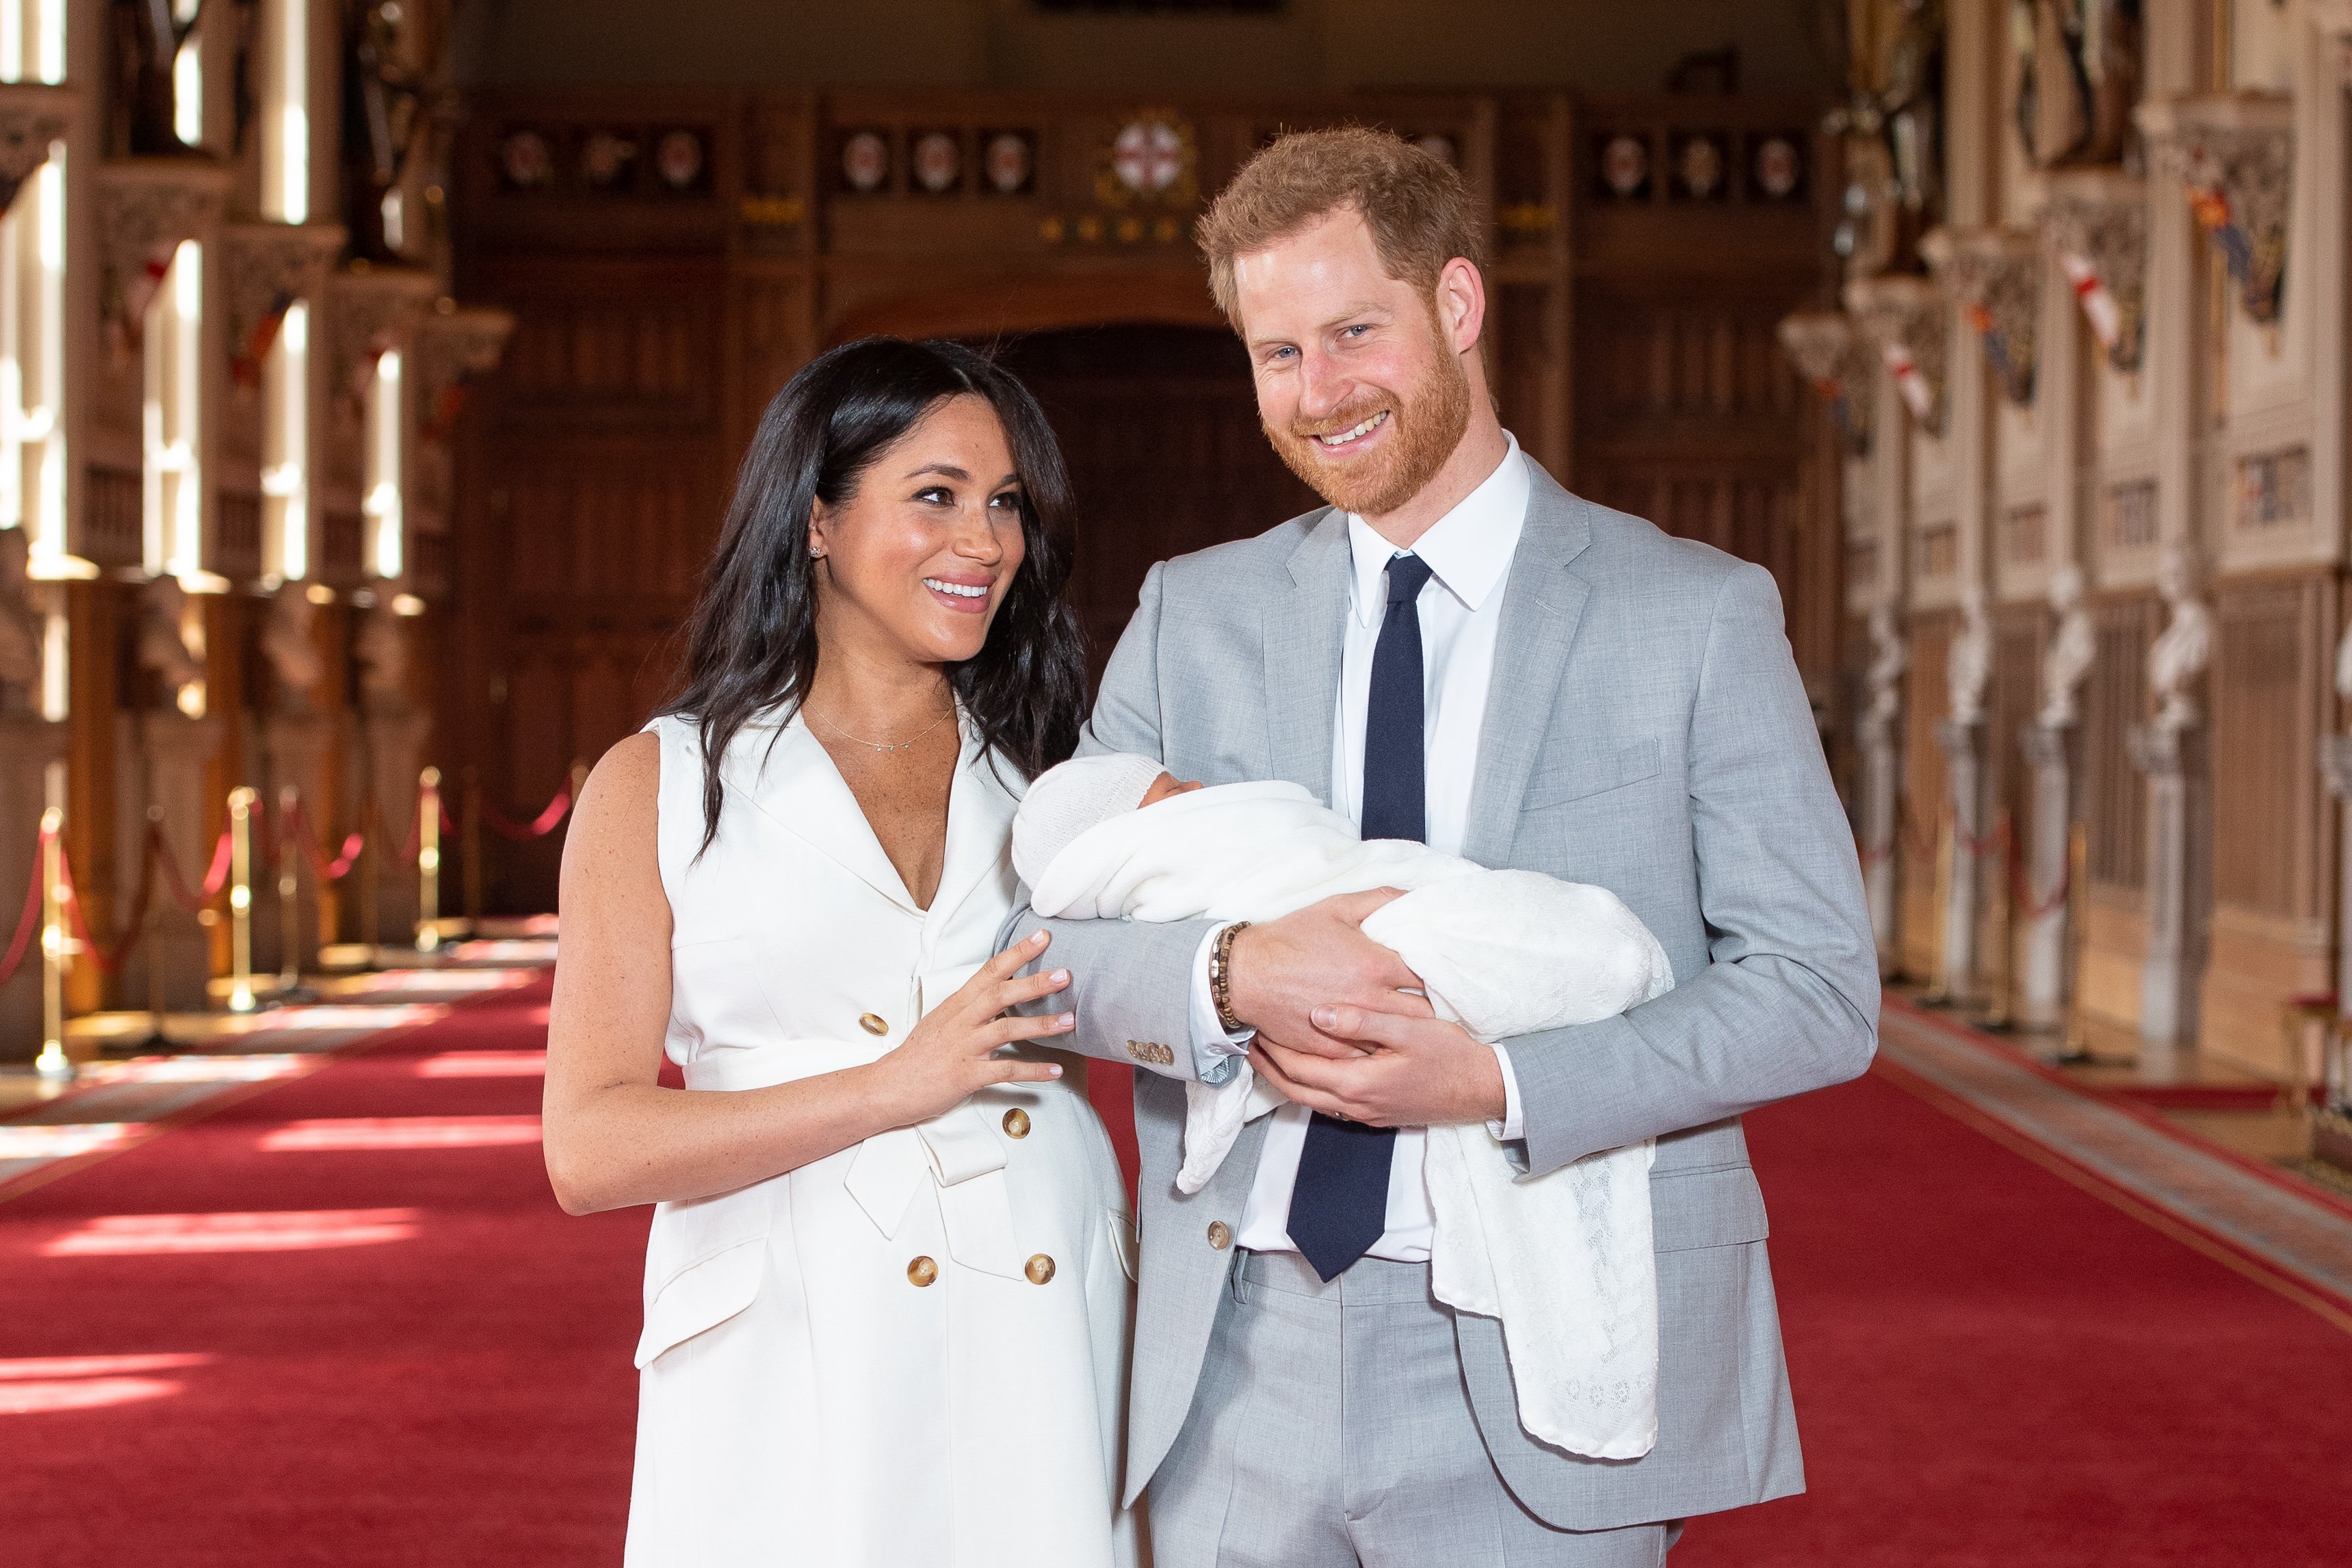 Prince Harry and Meghan pose with their son Archie Harrison Mountbatten-Windsor at Windsor Castle on May 8, 2019 in Windsor, England. | Source: Getty Images